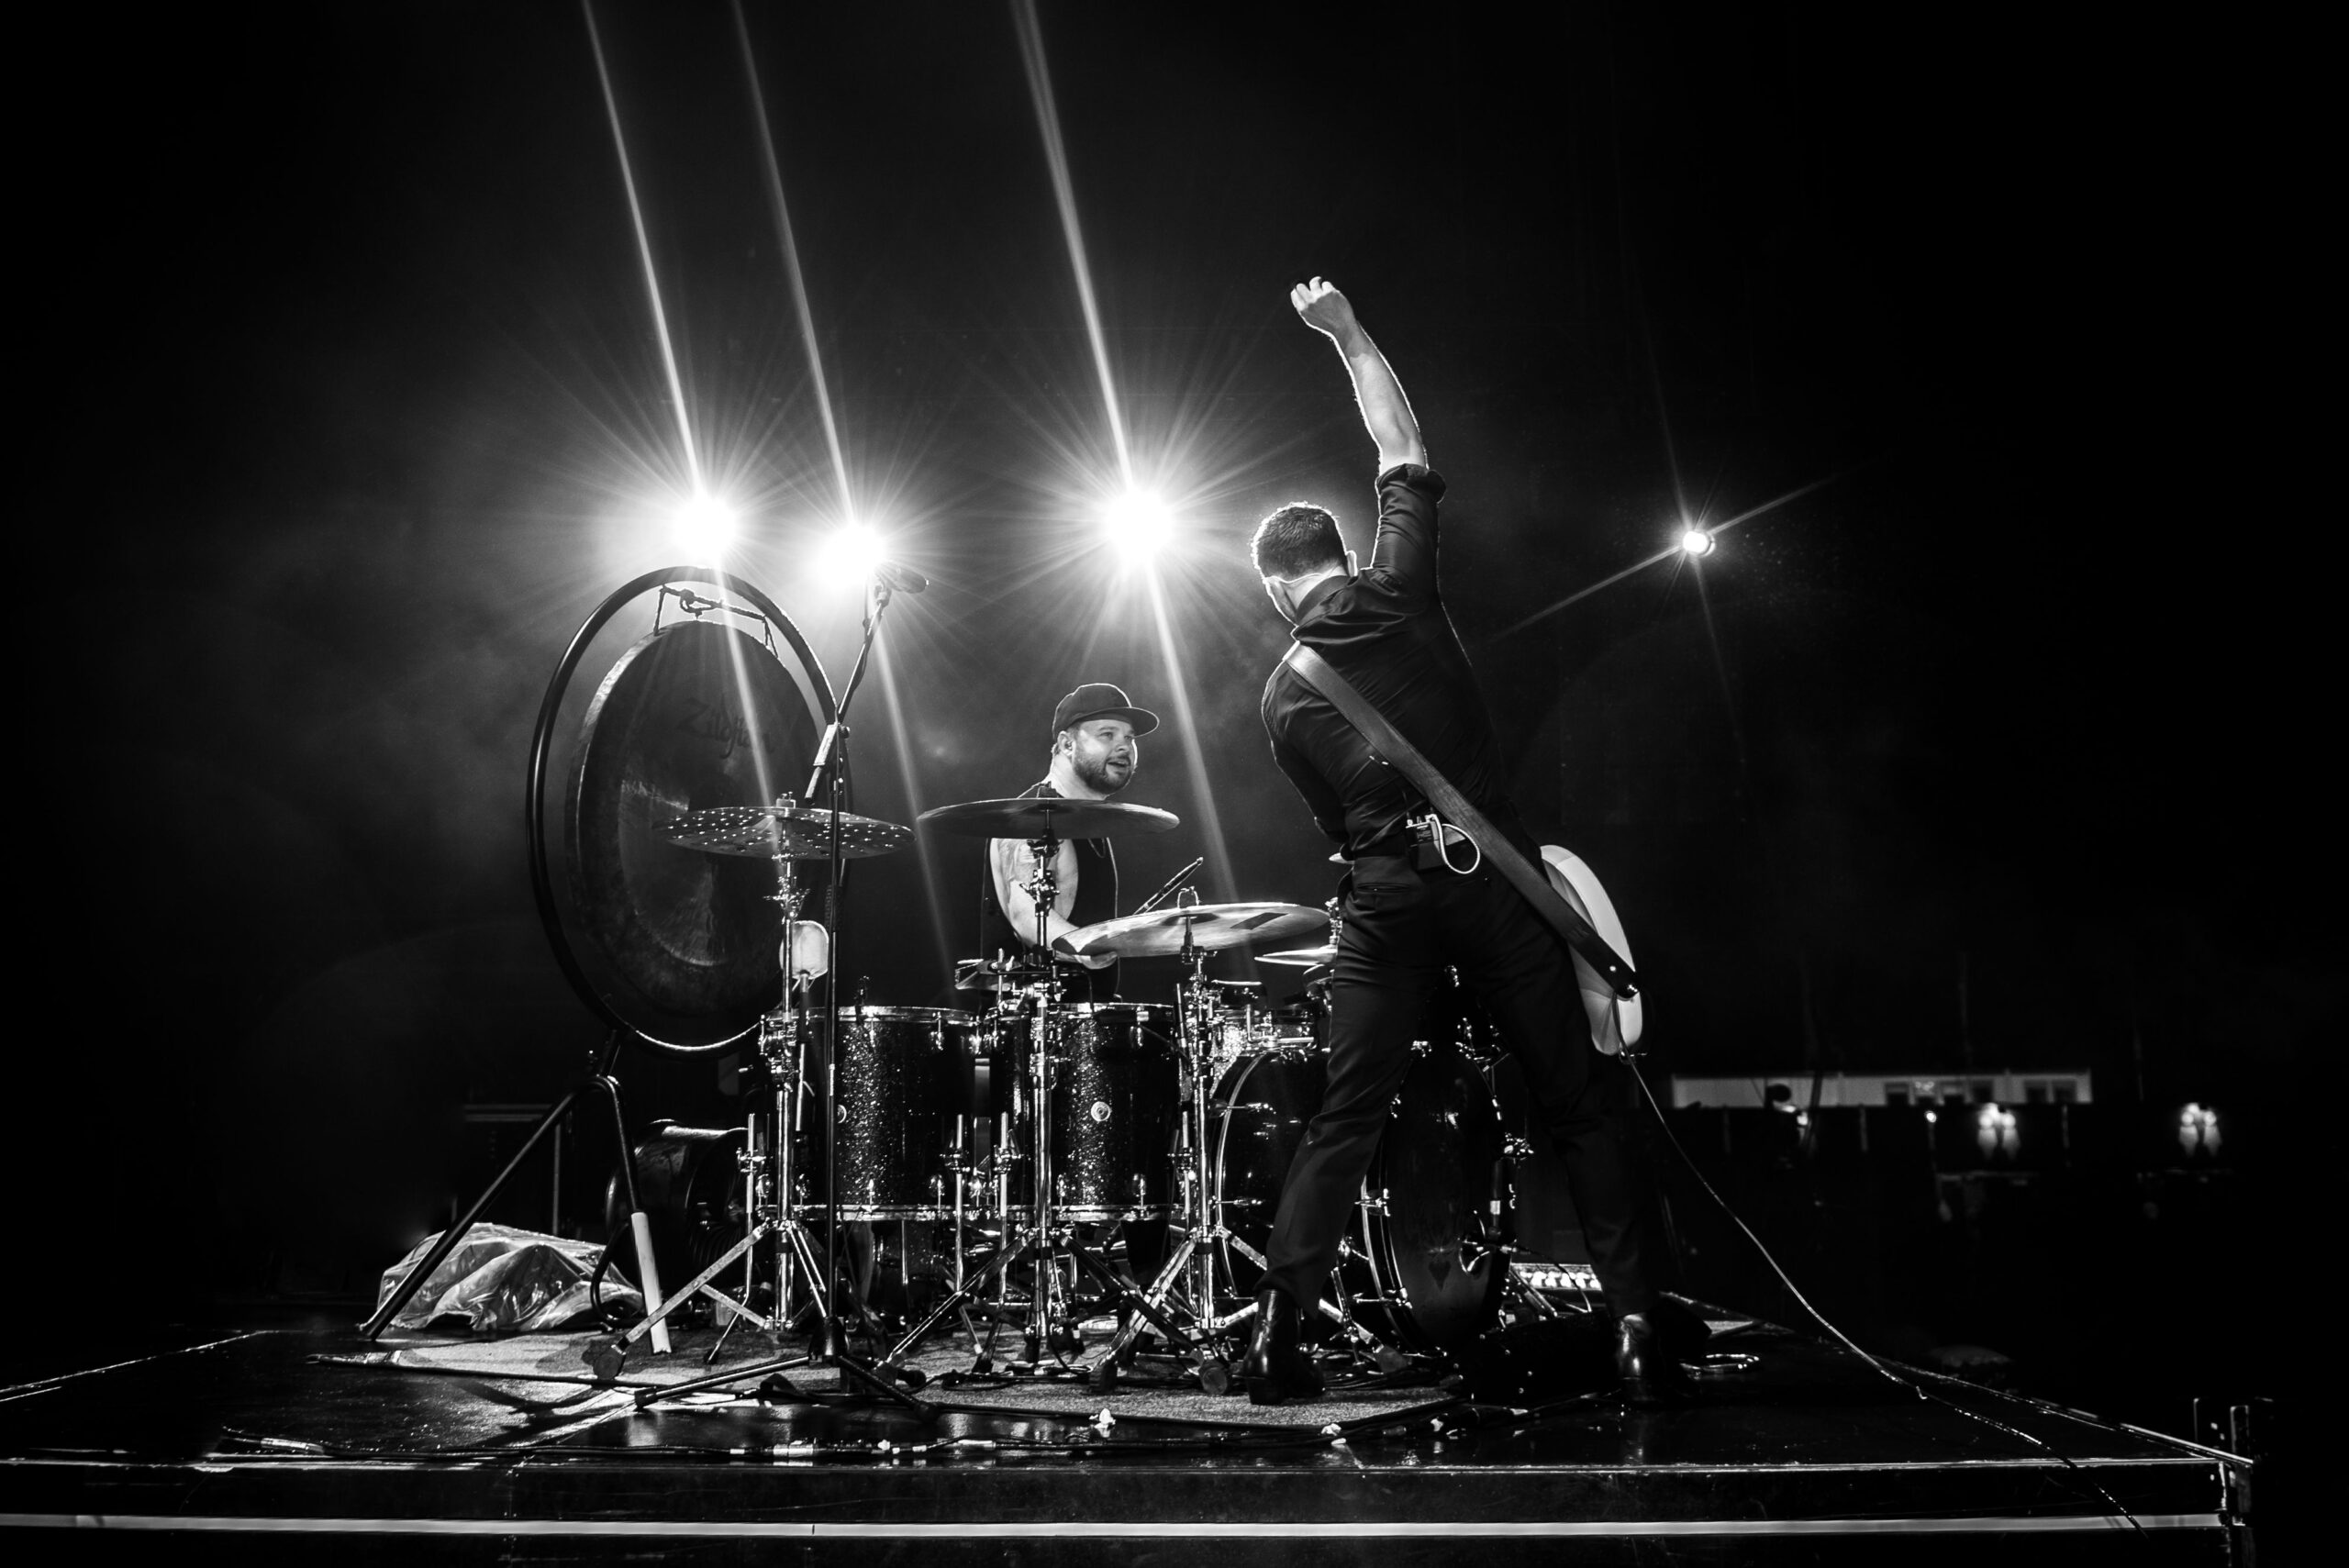 Royal Blood confirmed as first band to headline Swansea Arena